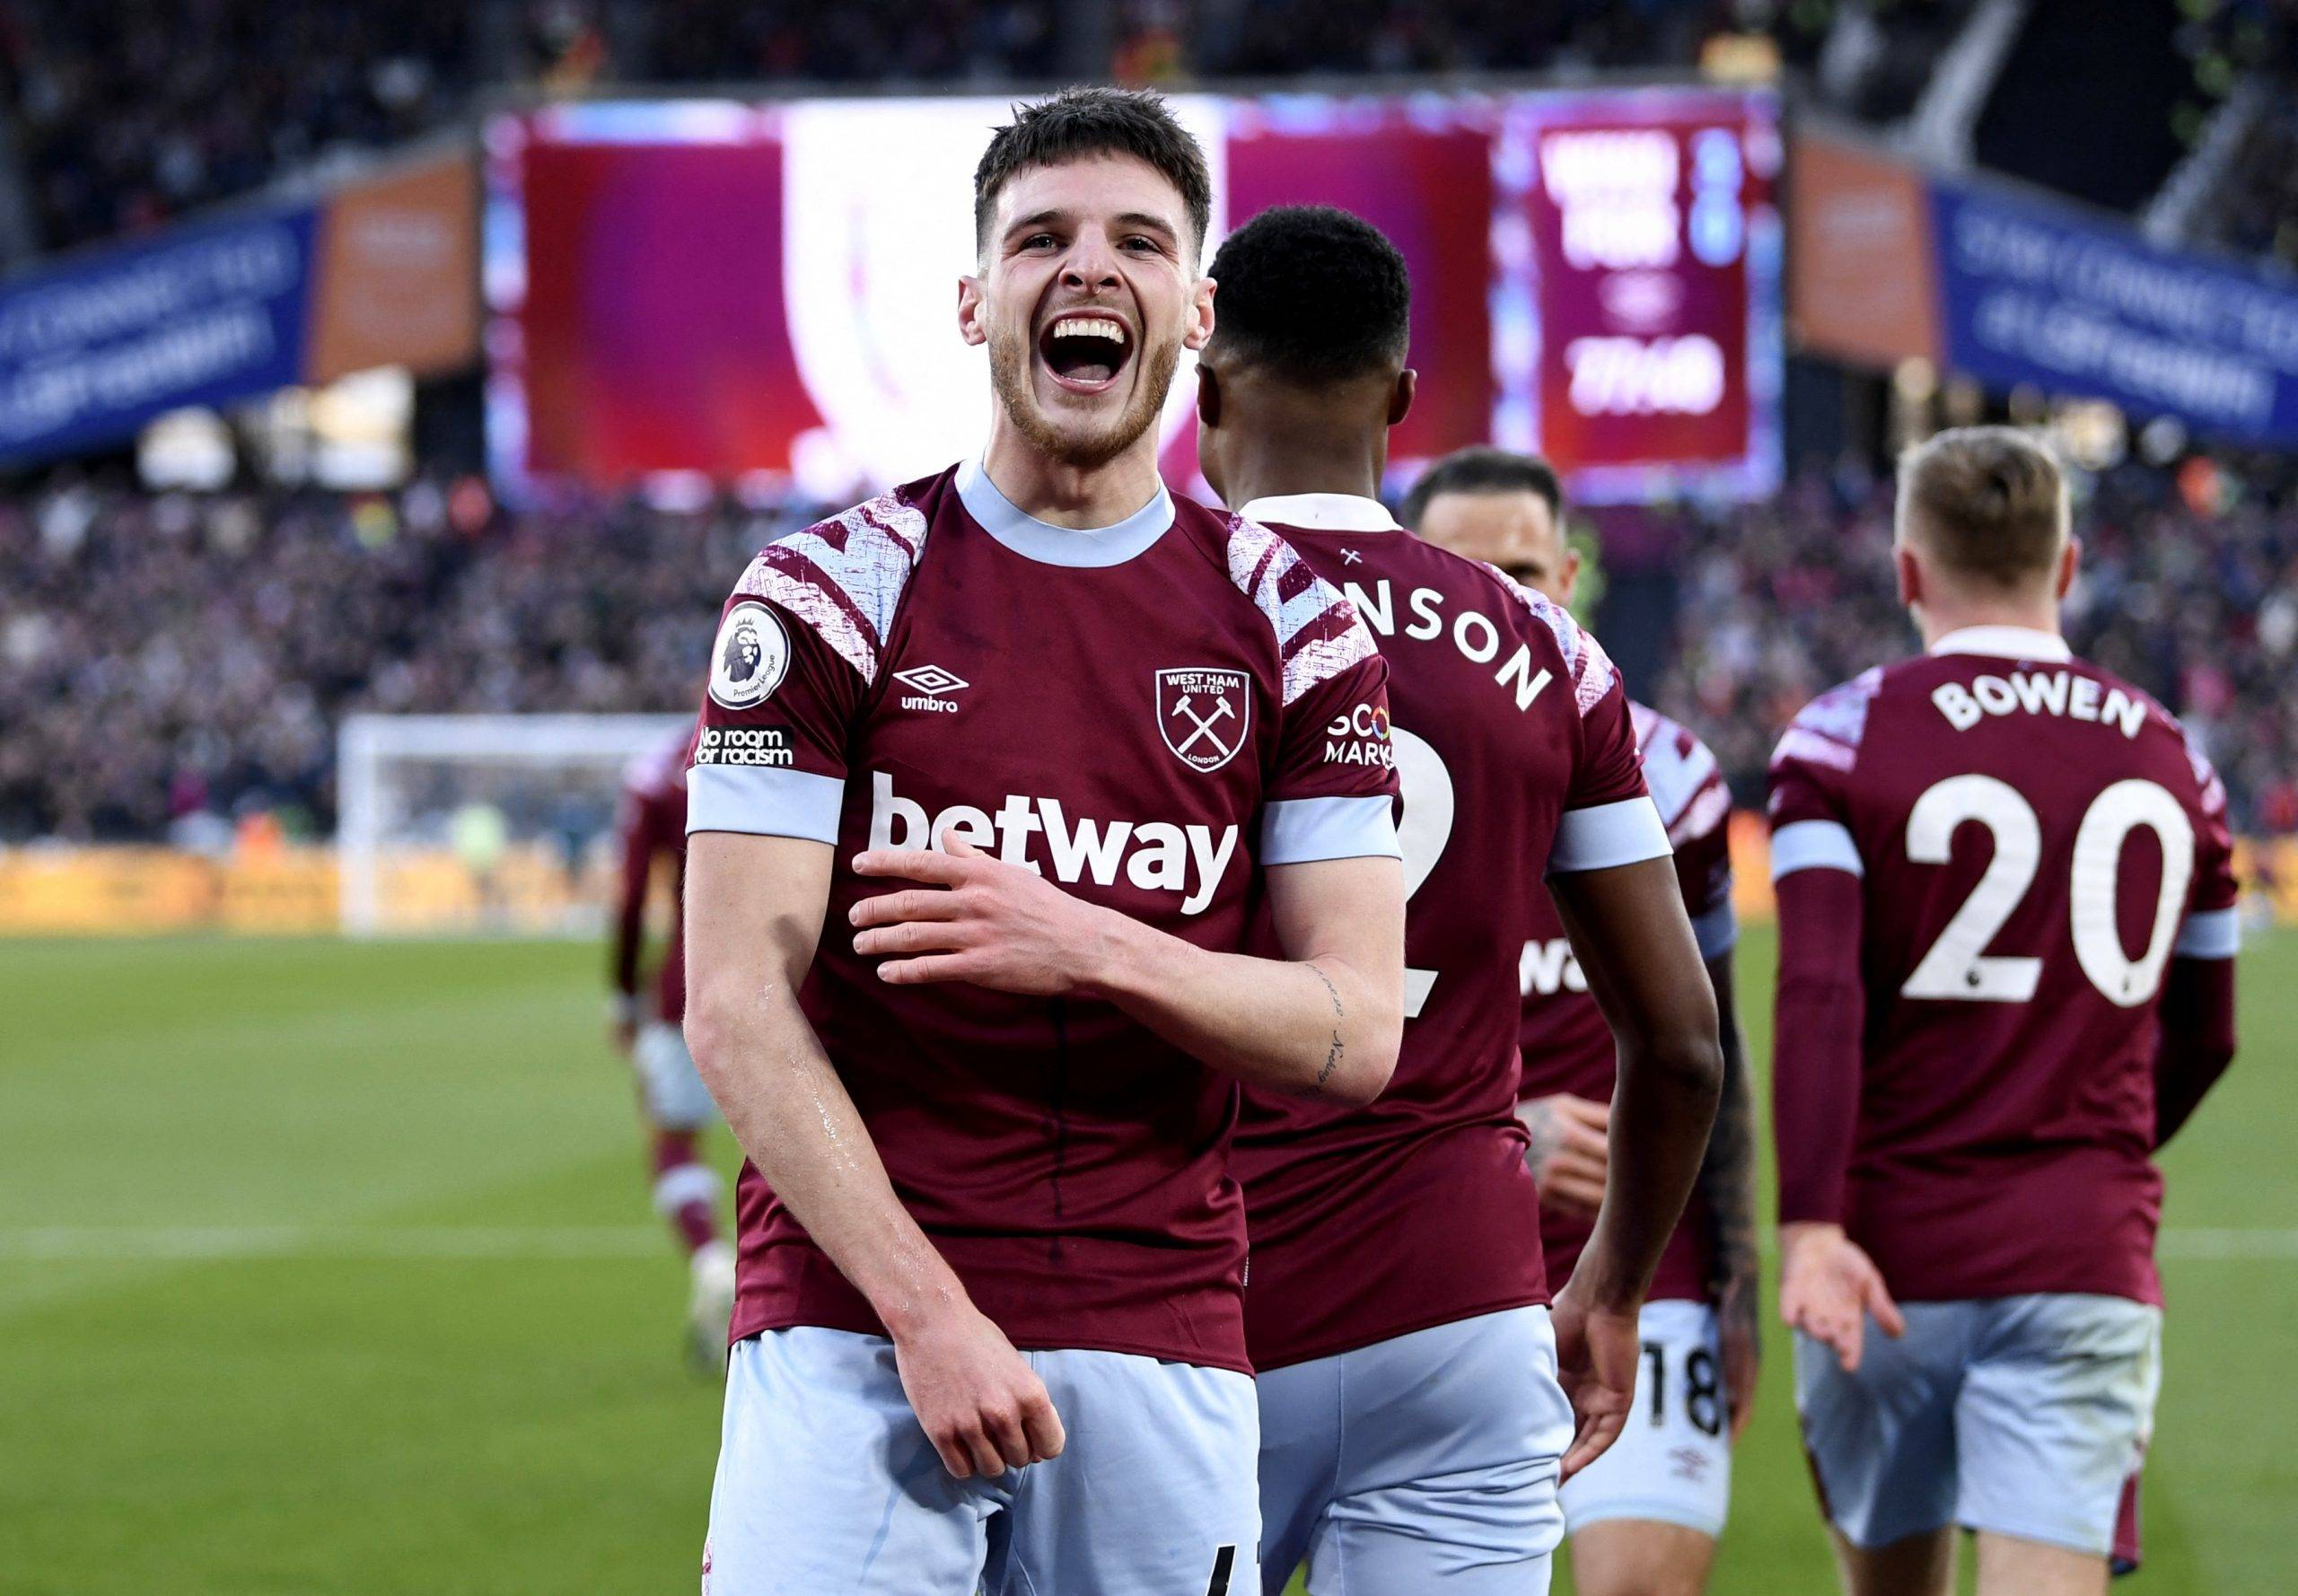 Manchester United to push Arsenal for Declan Rice signing - Follow up